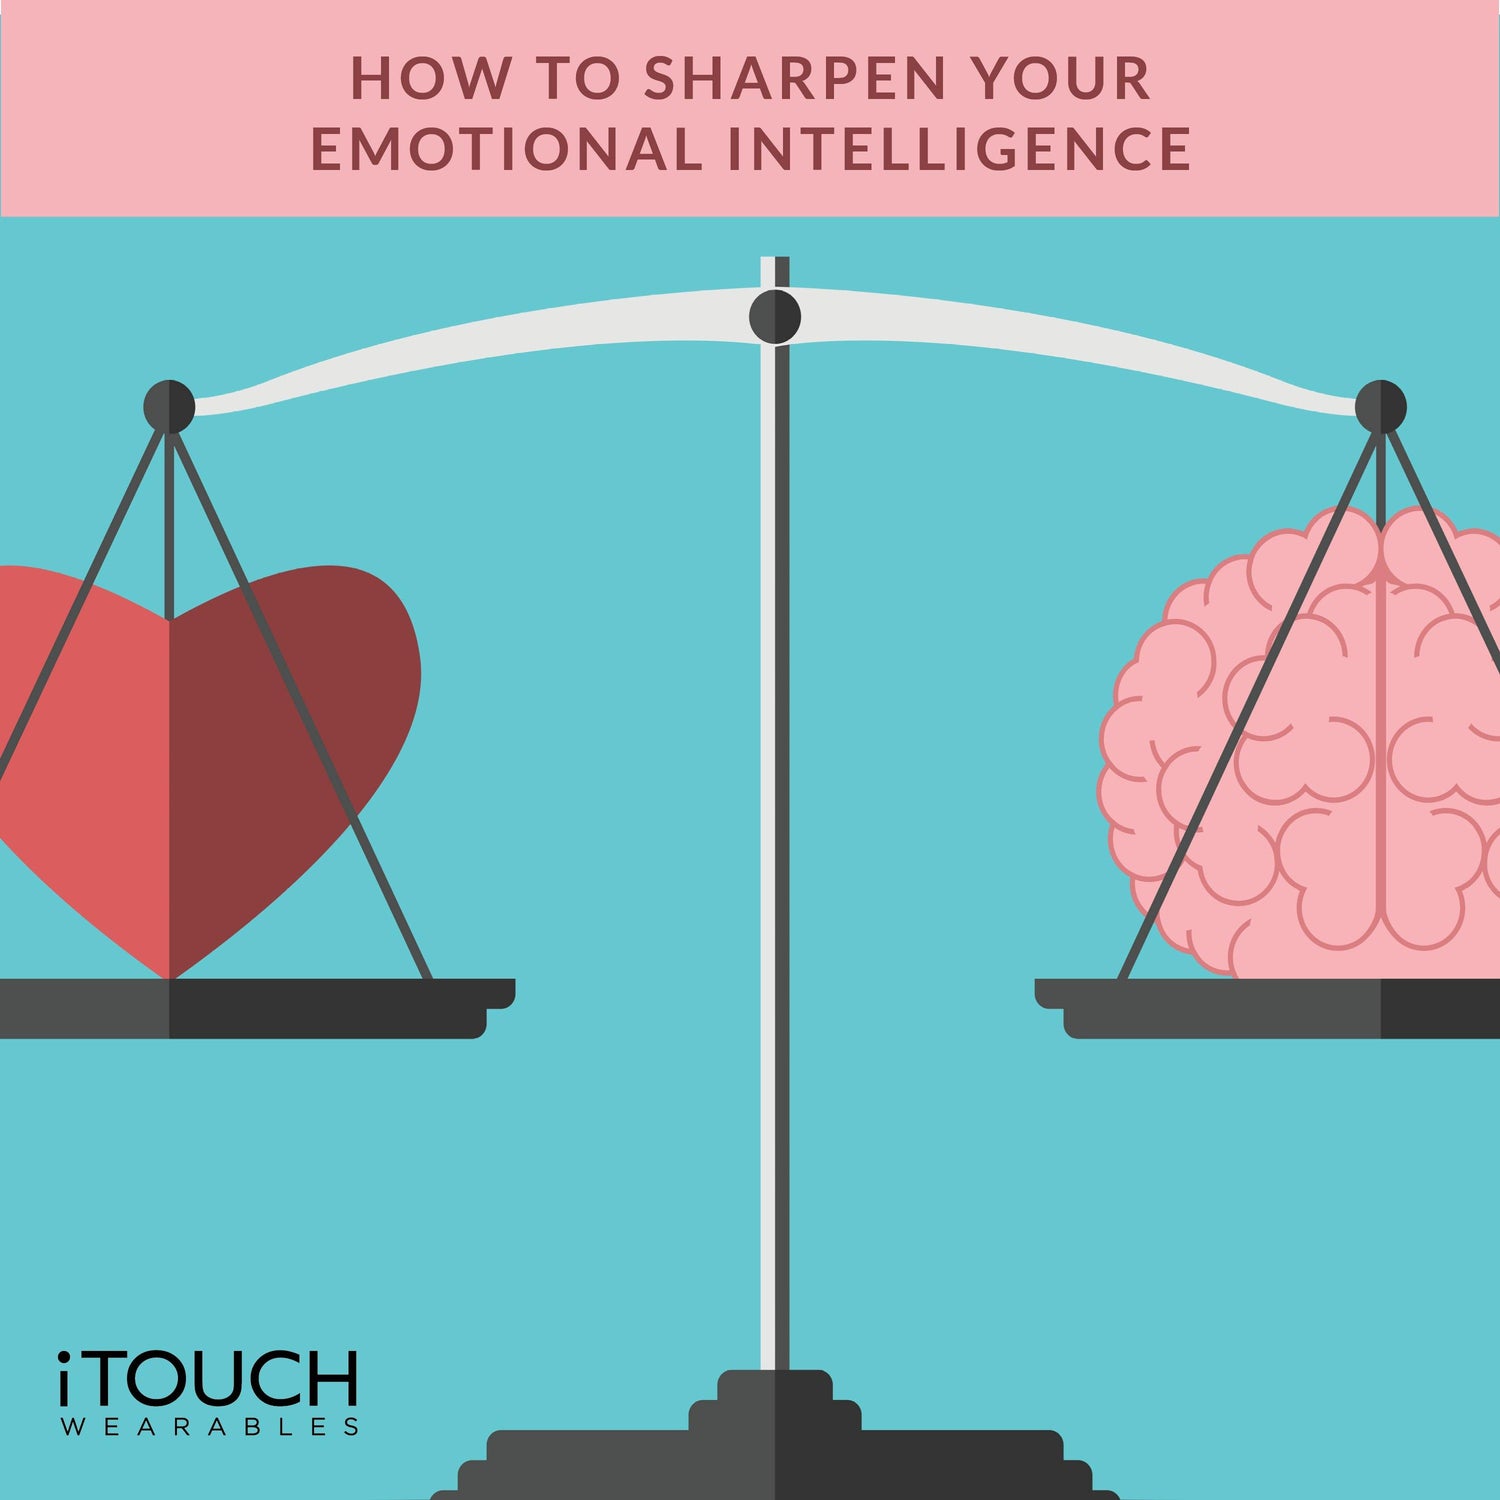 How To Sharpen Your Emotional Intelligence - iTOUCH Wearables